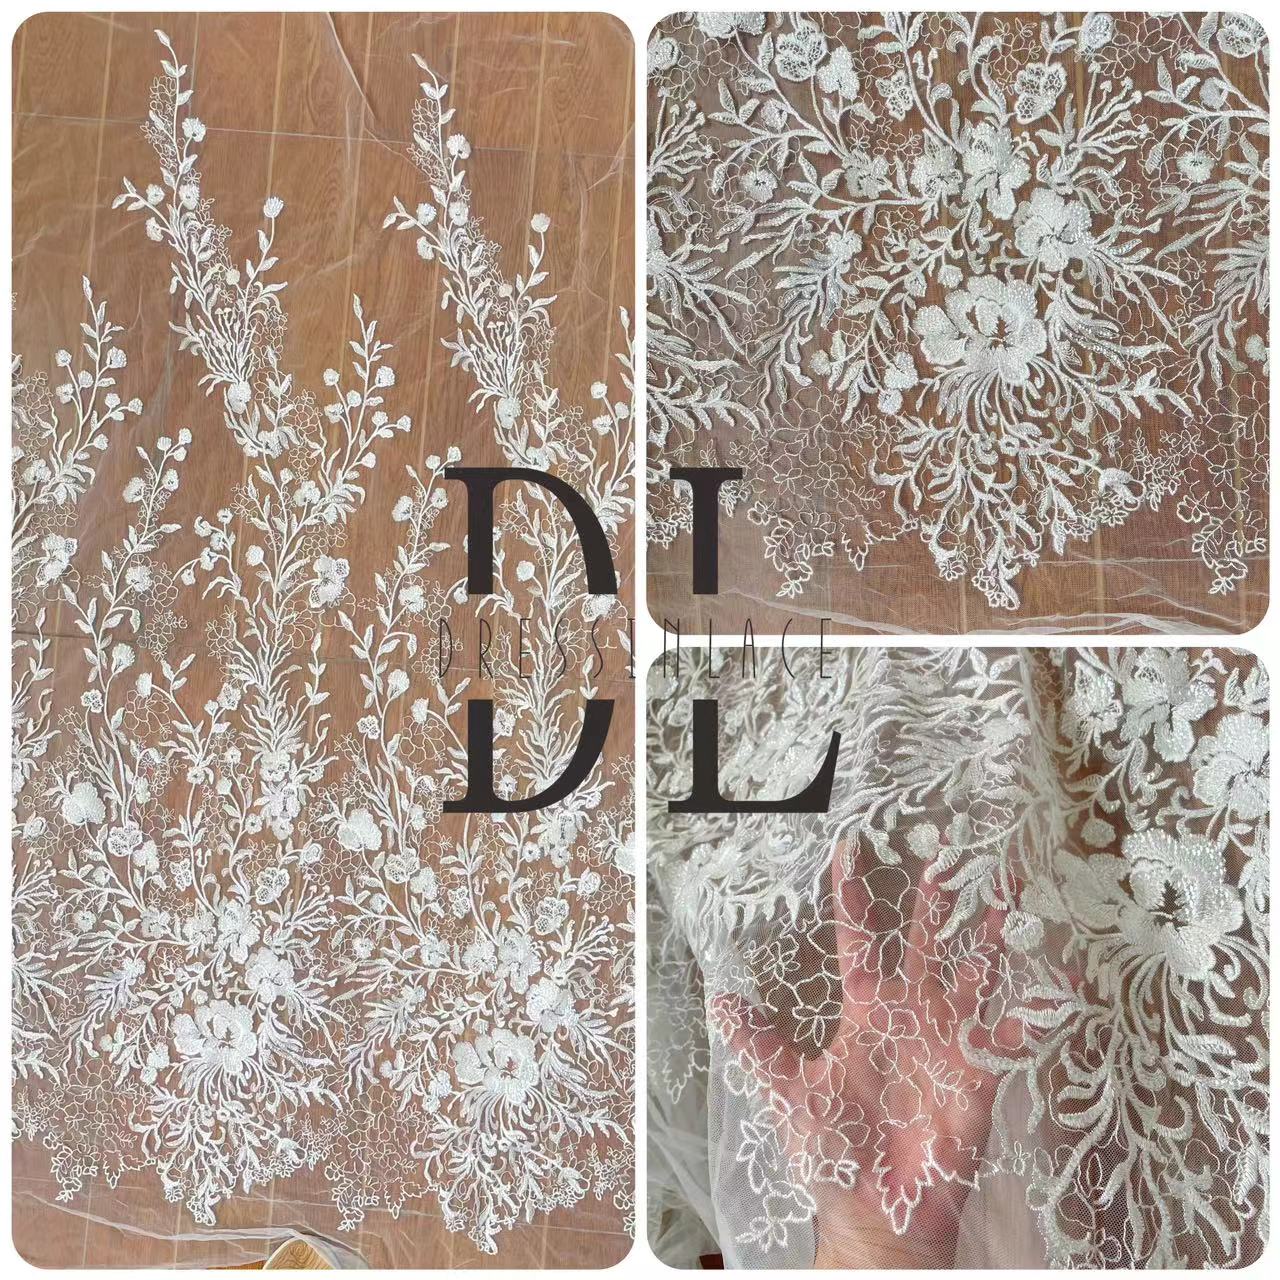 DL130002 Premium Embroidery Lace Fabric for Wedding Dresses - Exquisite Full-width Sheer with Sparkling Transparent Sequins and Trendy Floral Elements DL130002